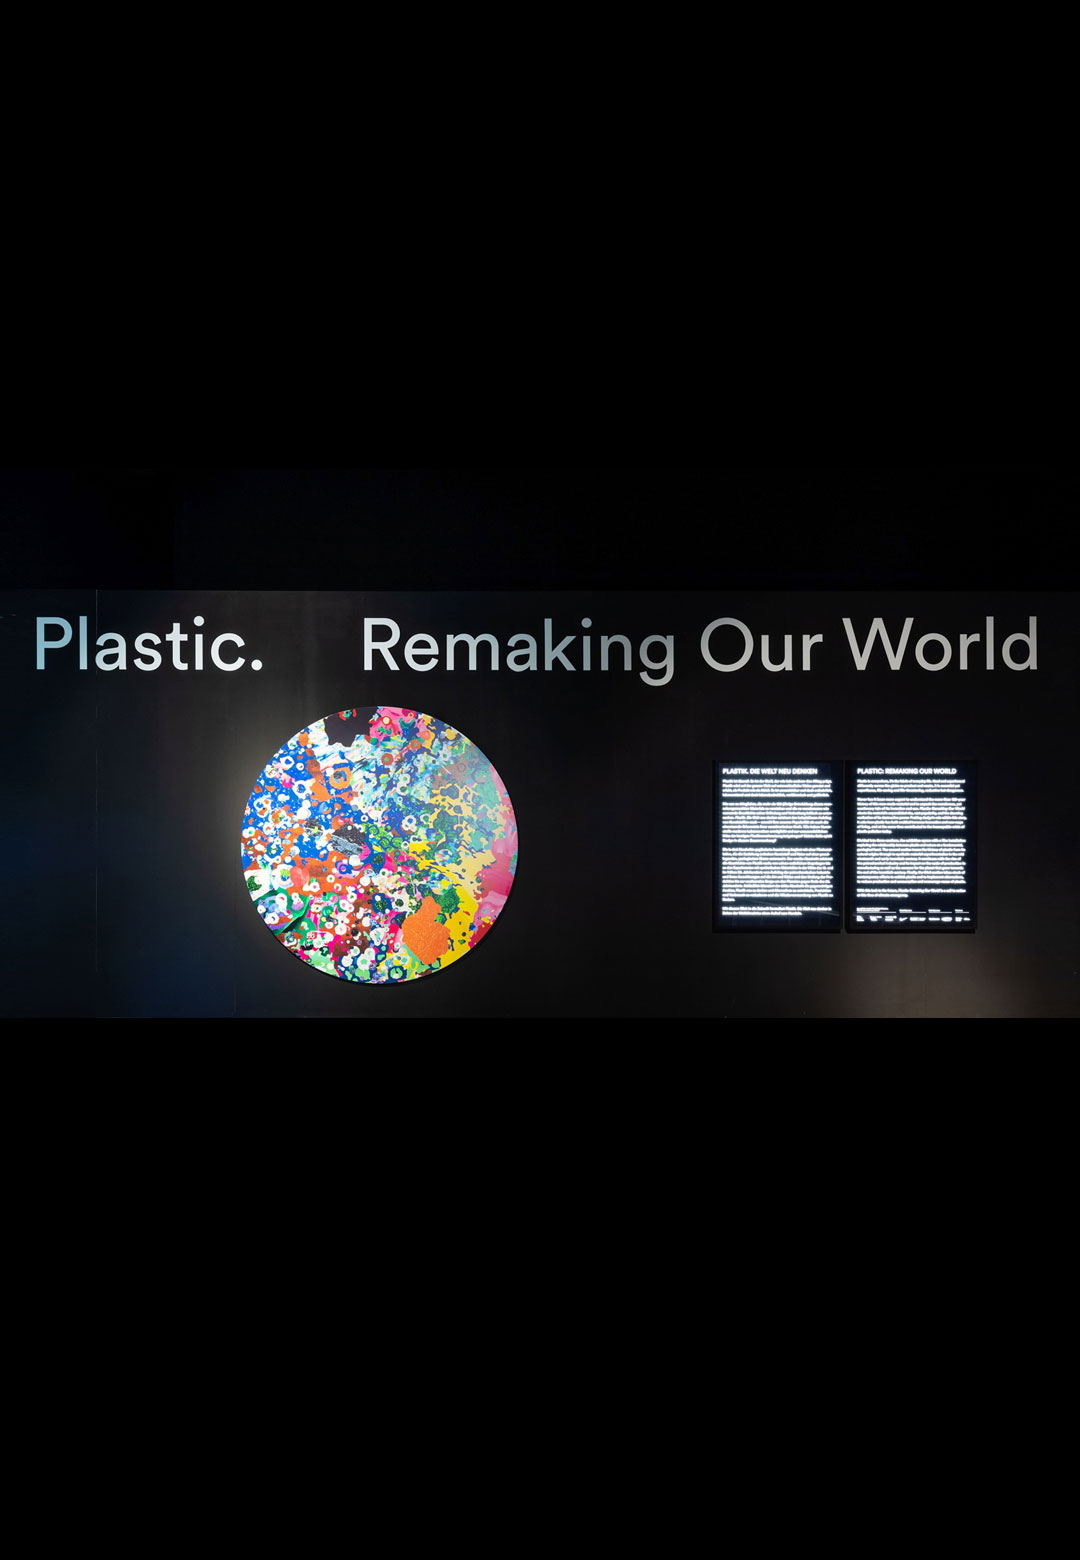 ‘Plastic. Remaking our world’: A hackneyed debate through a refreshing lens